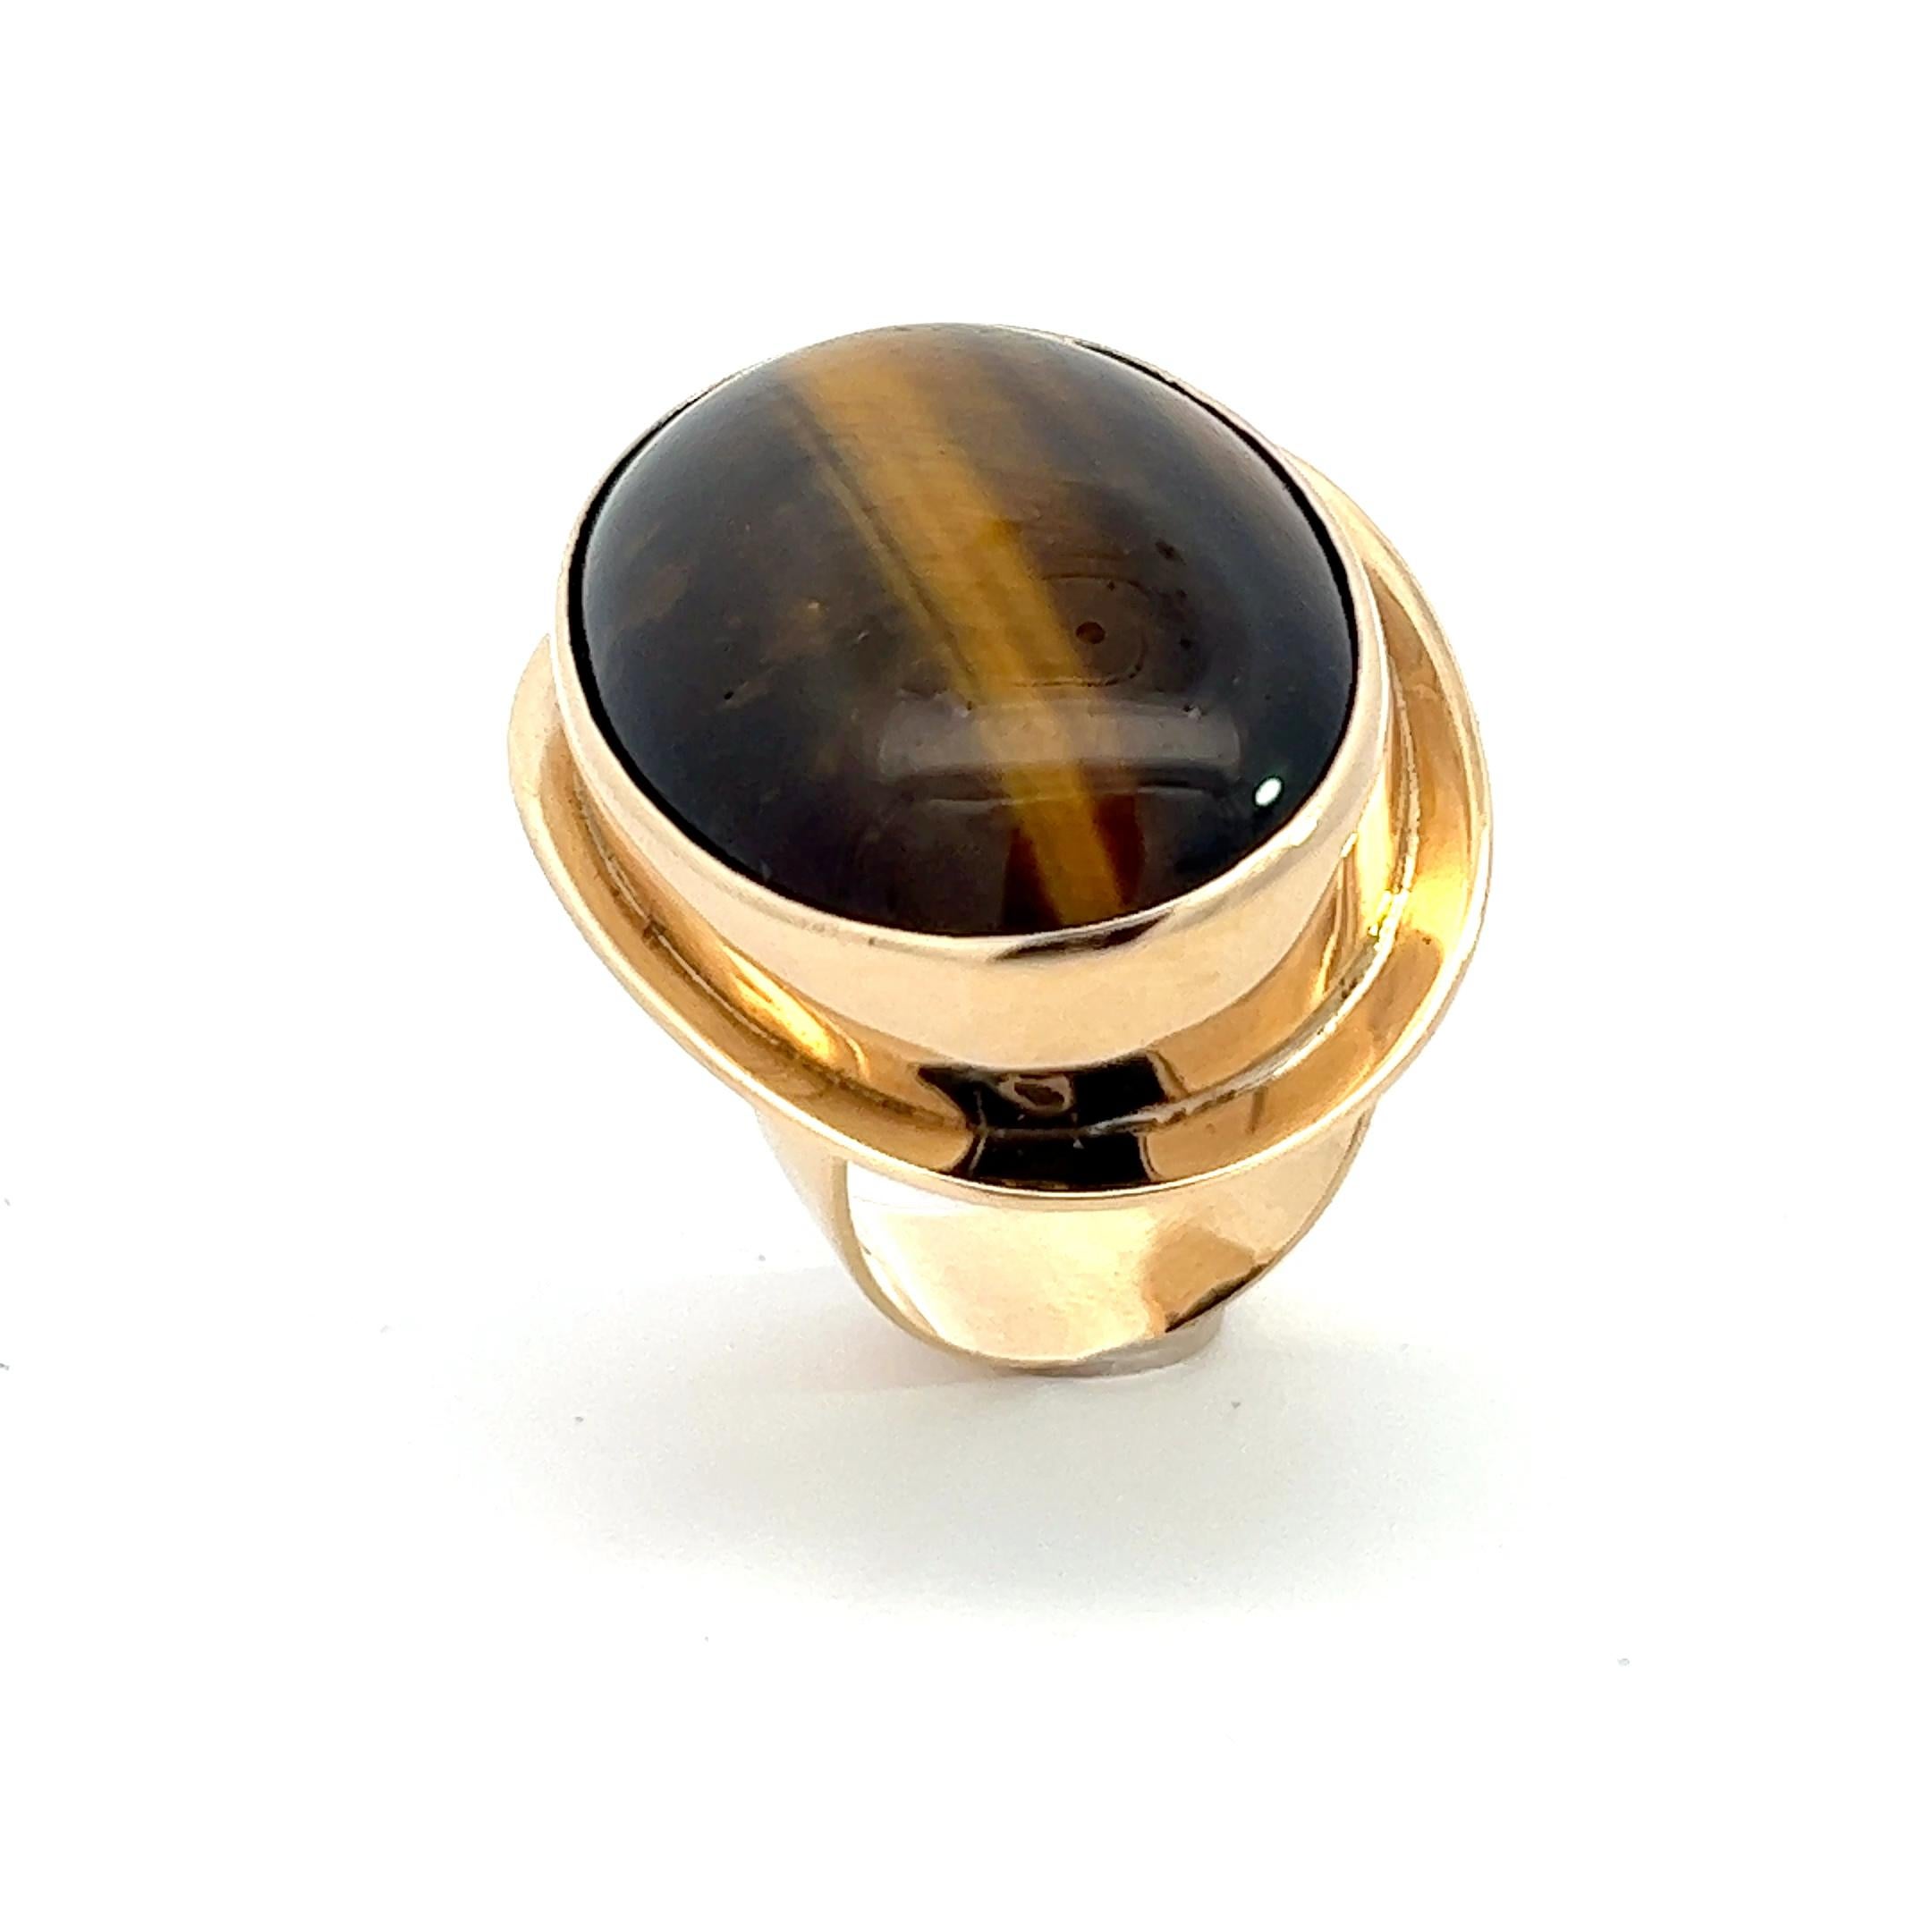 A 14k yellow gold and Tiger's Eye Quartz ring by Paul Erik Jensen.

Origin: Løgstrup, Denmark.
Age: circa 1970.
Ring size: 54.
Weight: circa 21.2 grams.
Marked with the initials P.E.J. and 585.

This ring can be resized by a goldsmith.

Please note